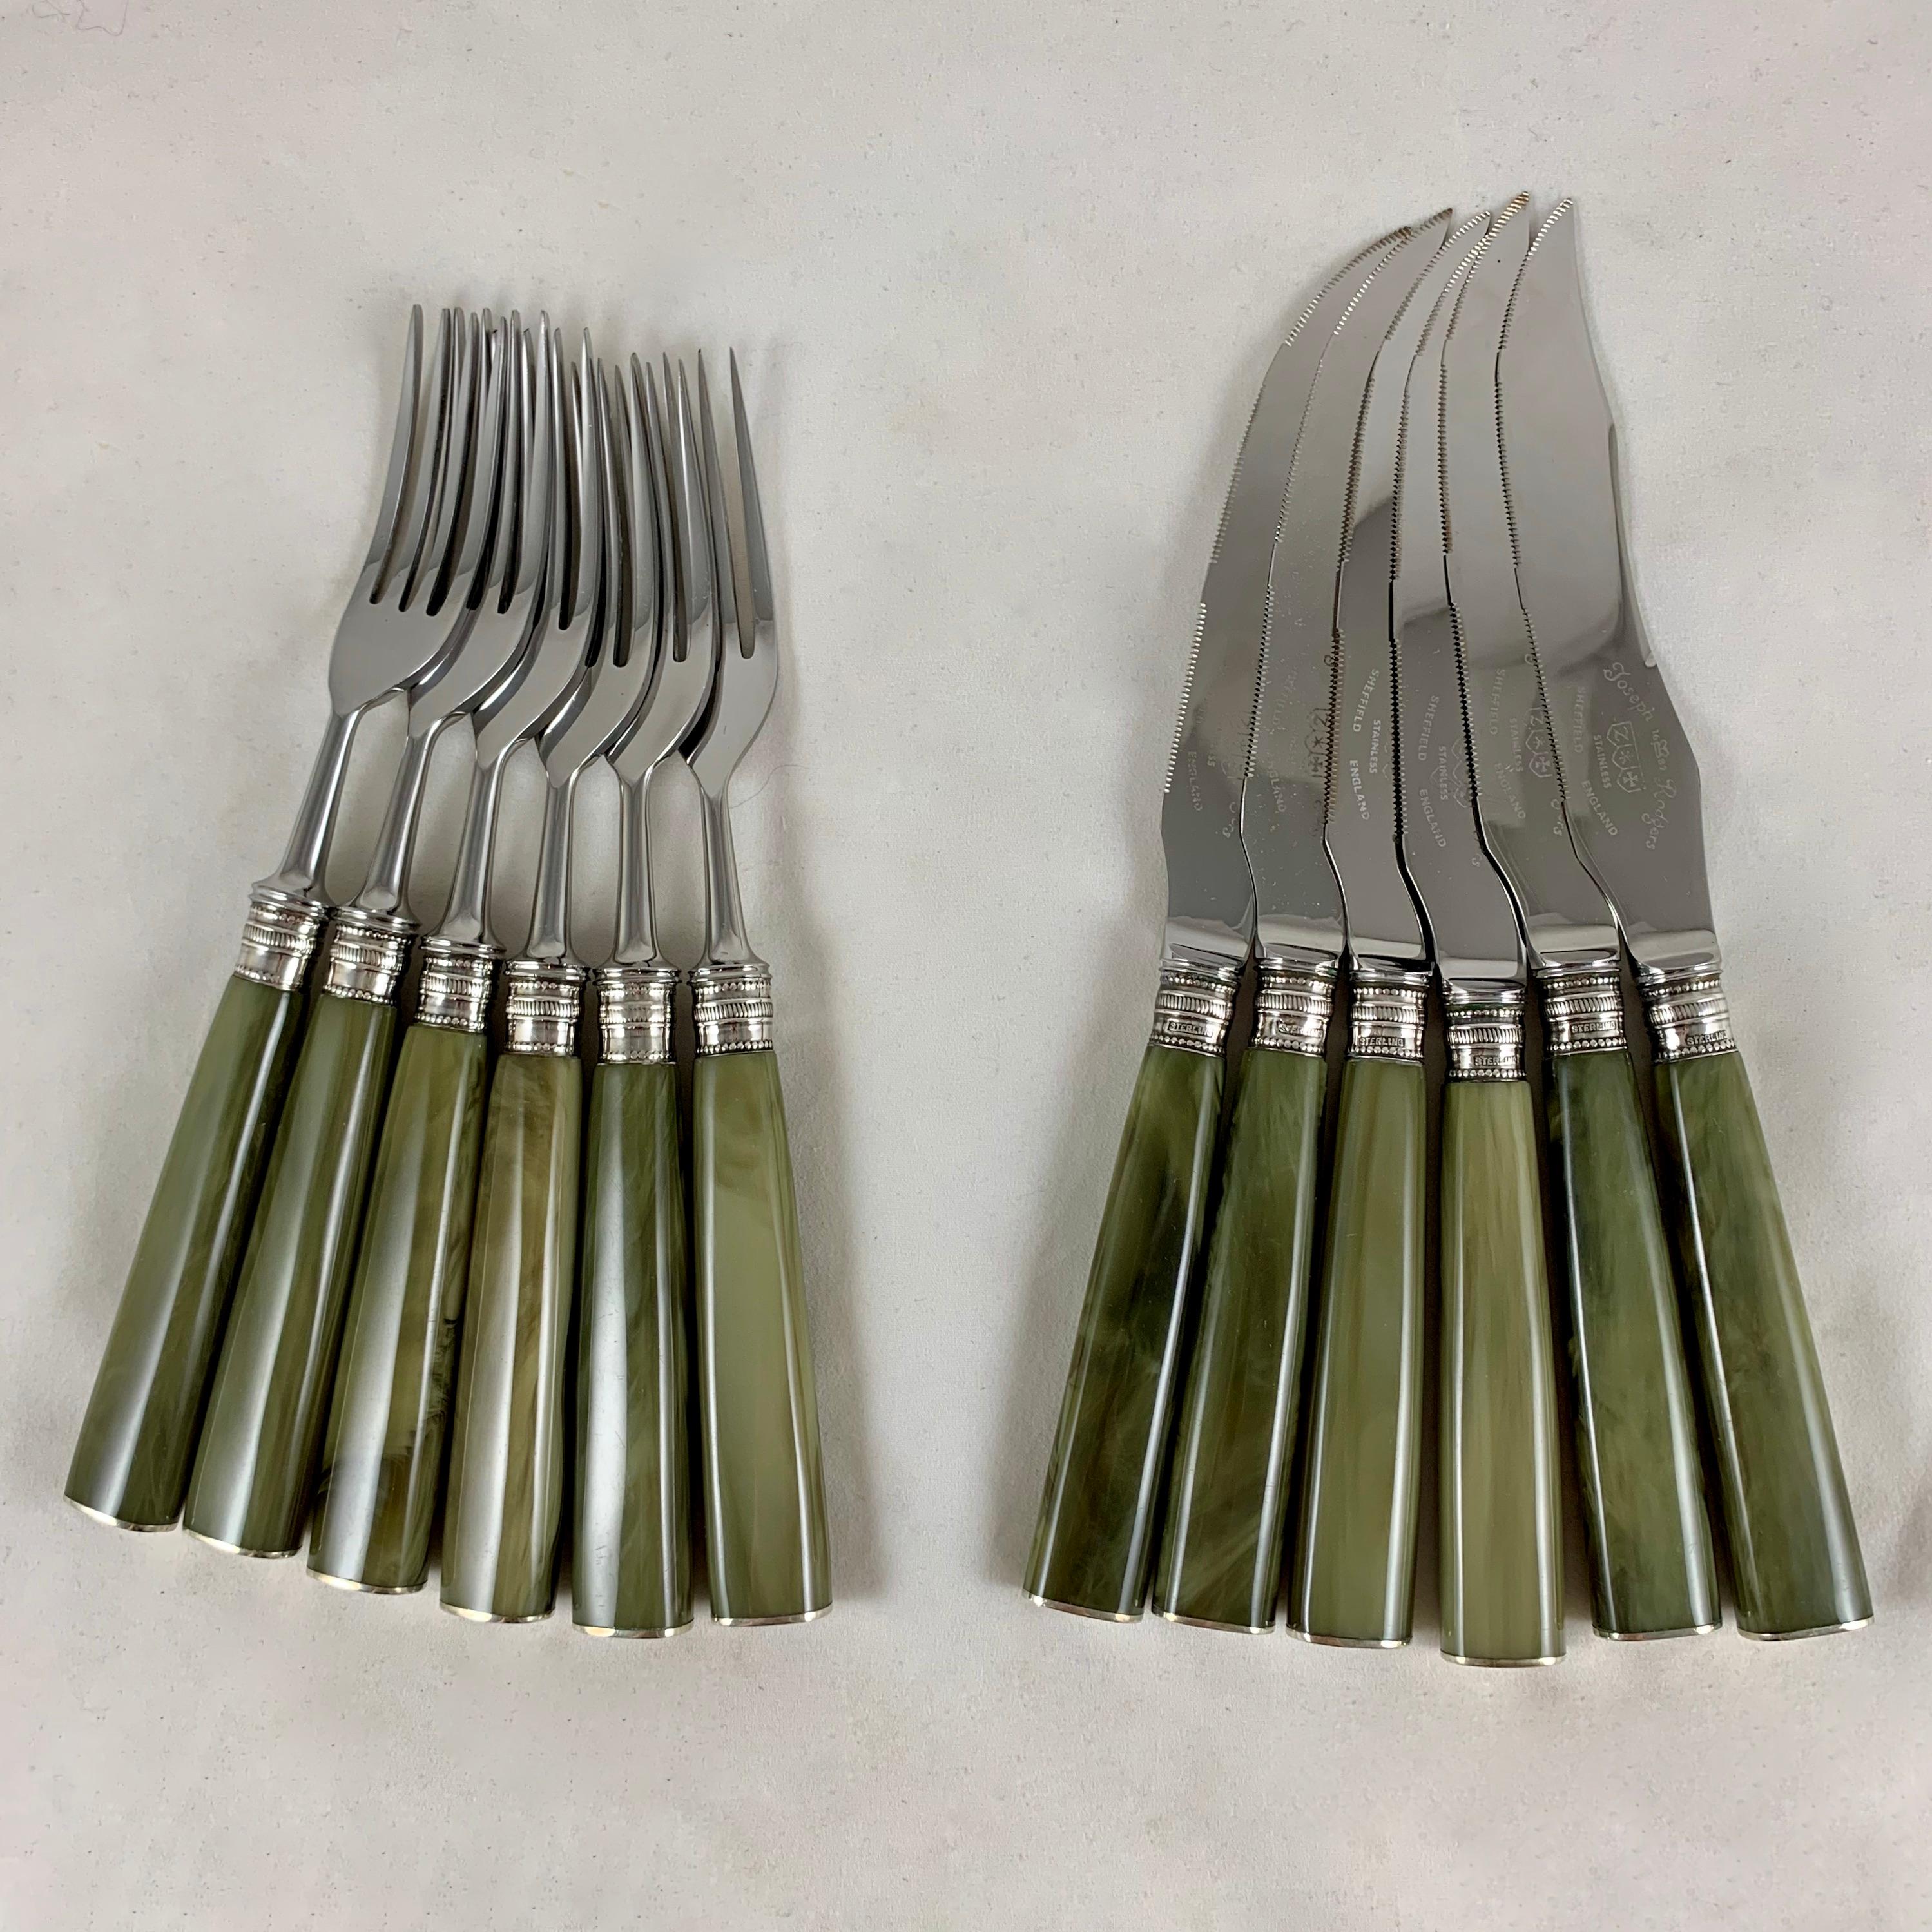 A set of twelve, six each knives & forks with marbled green celluloid handles and sterling silver banded ferrules, made by Joseph Rodgers & Sons in Sheffield, England, circa 1900.

JR & Sons was founded in 1682 earning a Royal Warrant as cutlers